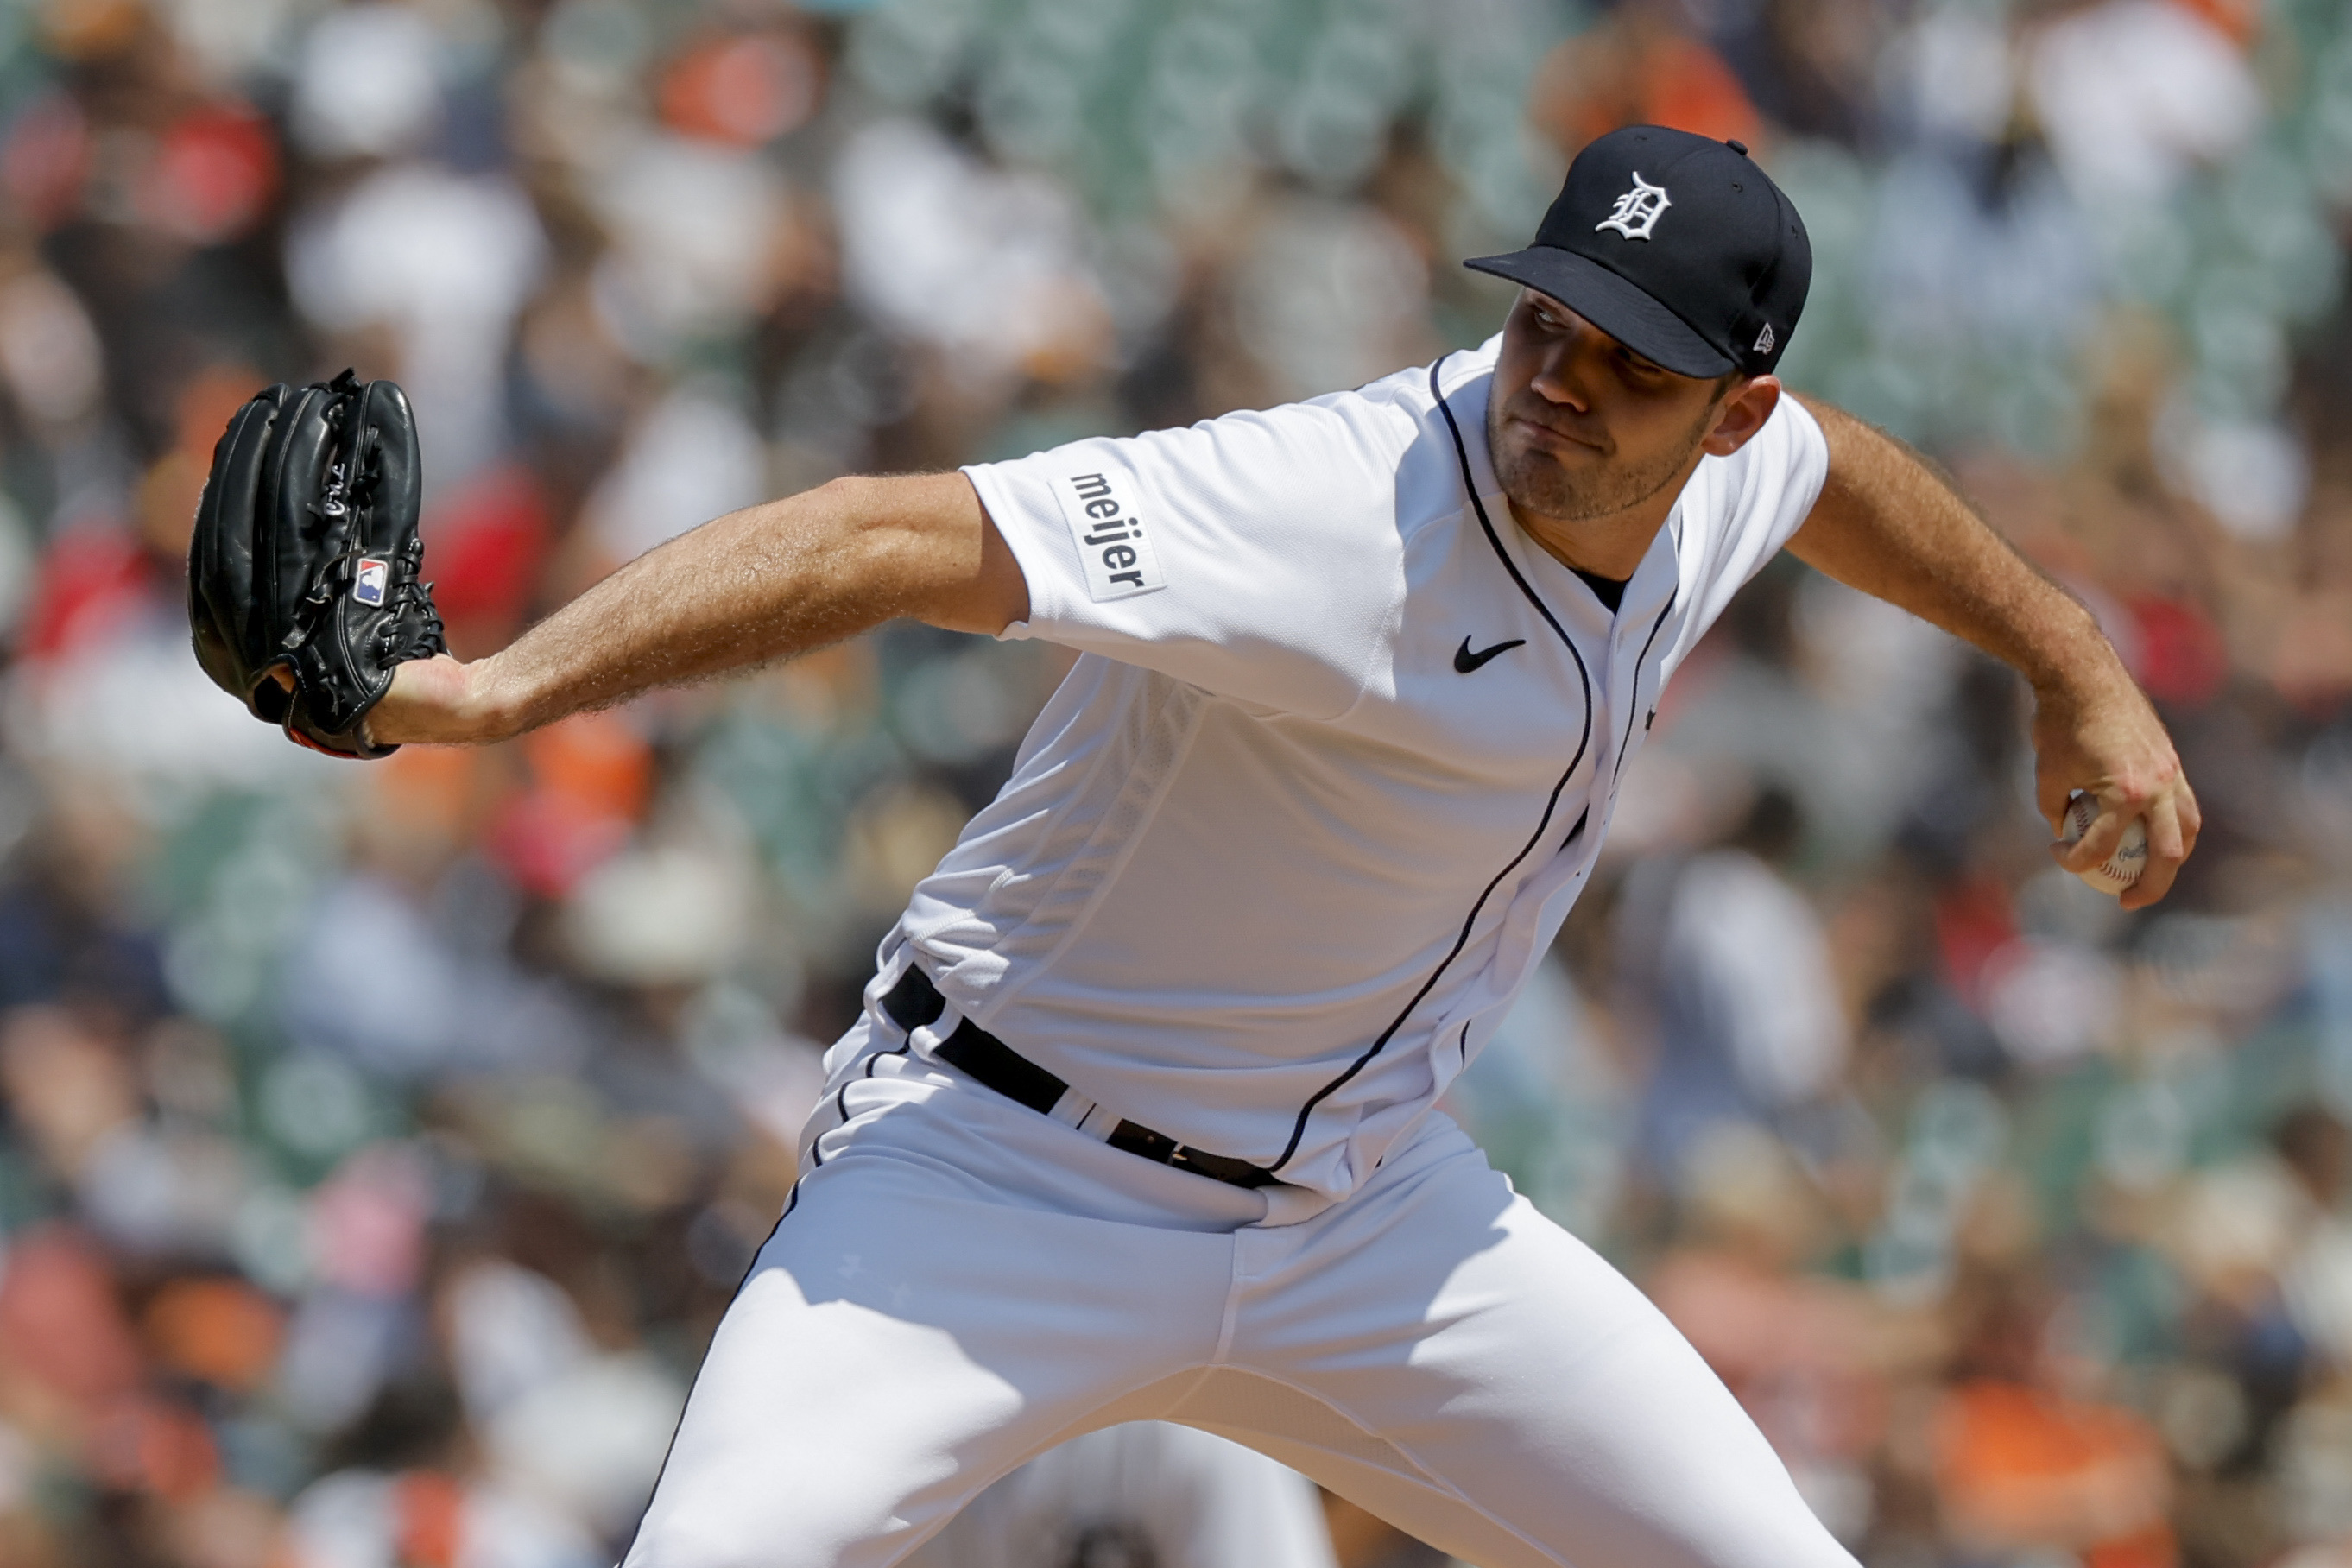 Tigers swept in doubleheader by Ohtani's arm and bat – Friday